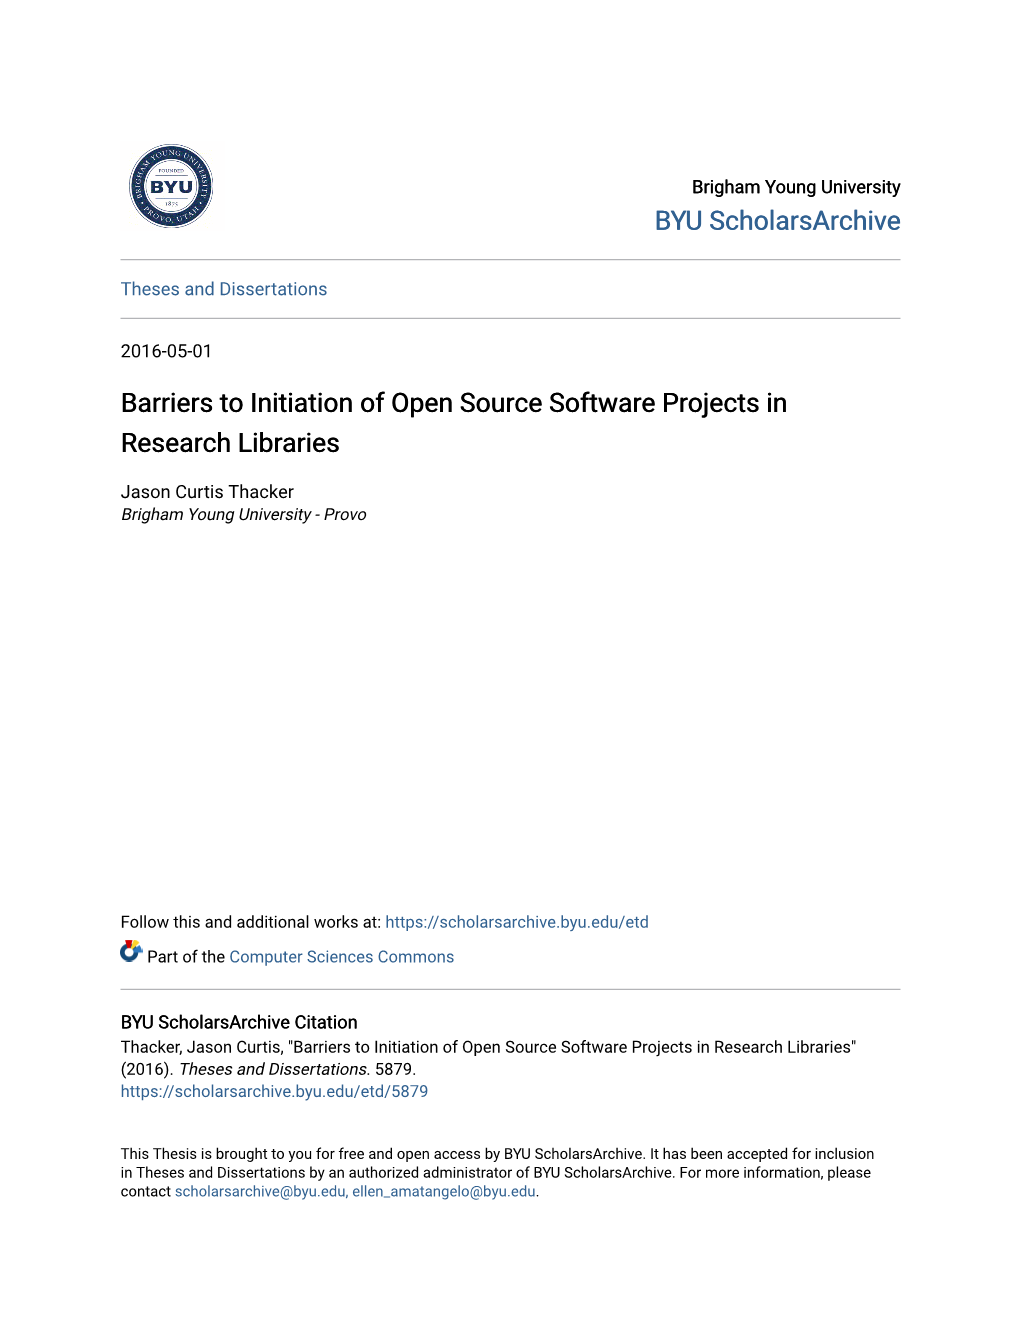 Barriers to Initiation of Open Source Software Projects in Research Libraries